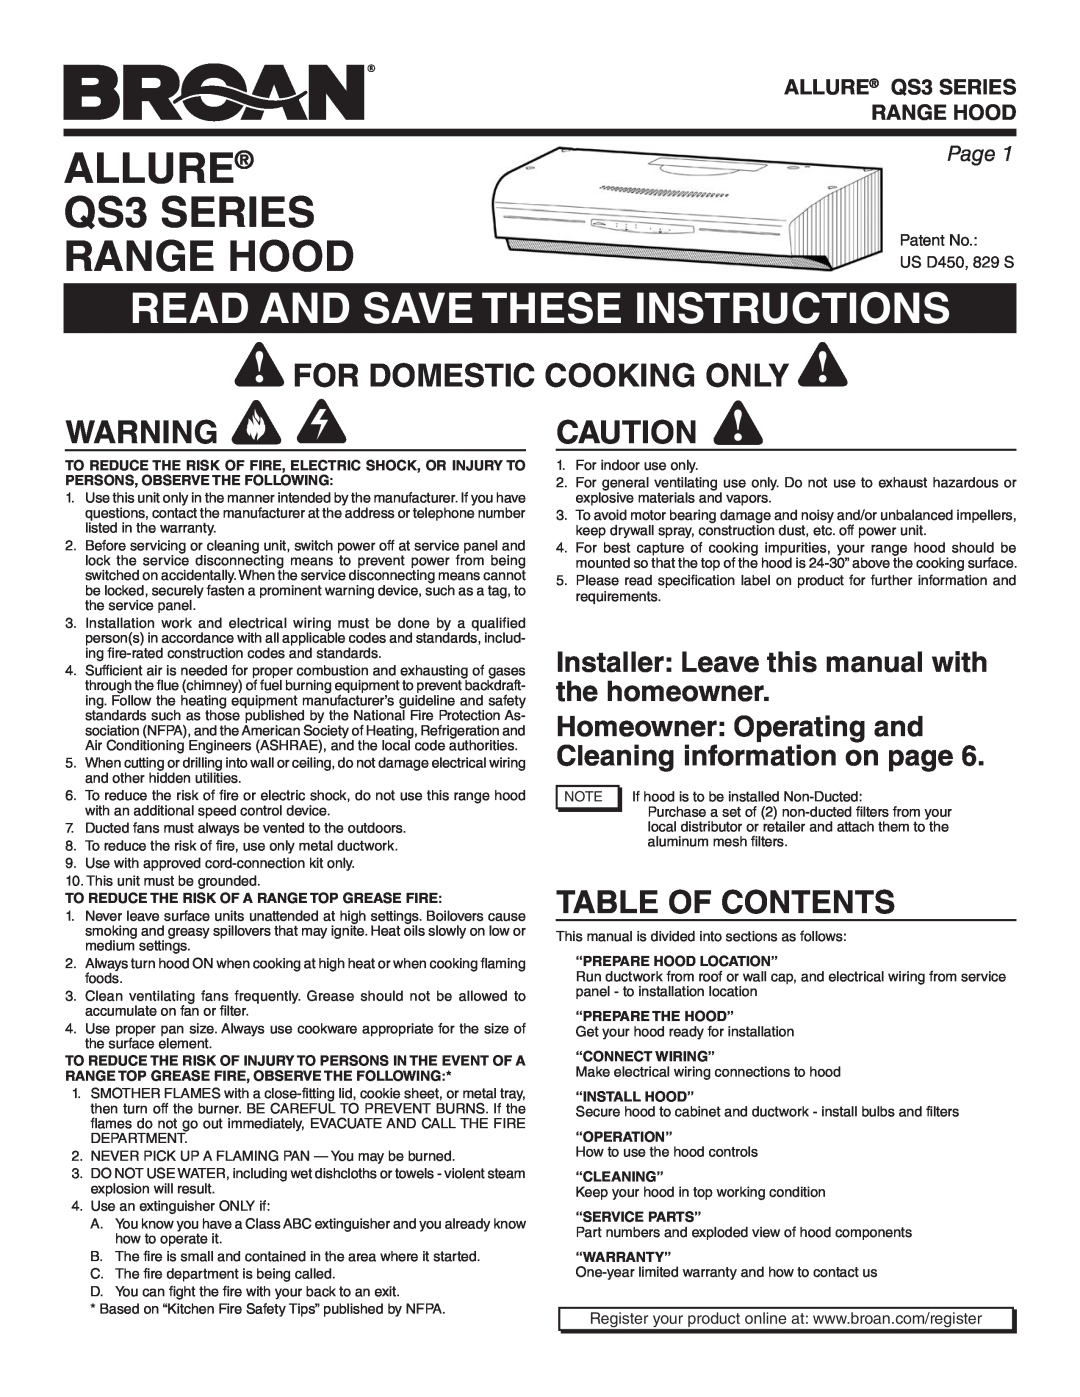 Broan QS330SS warranty Allure, QS3 SERIES, Range Hood, Read And Save These Instructions, For Domestic Cooking Only, Page 